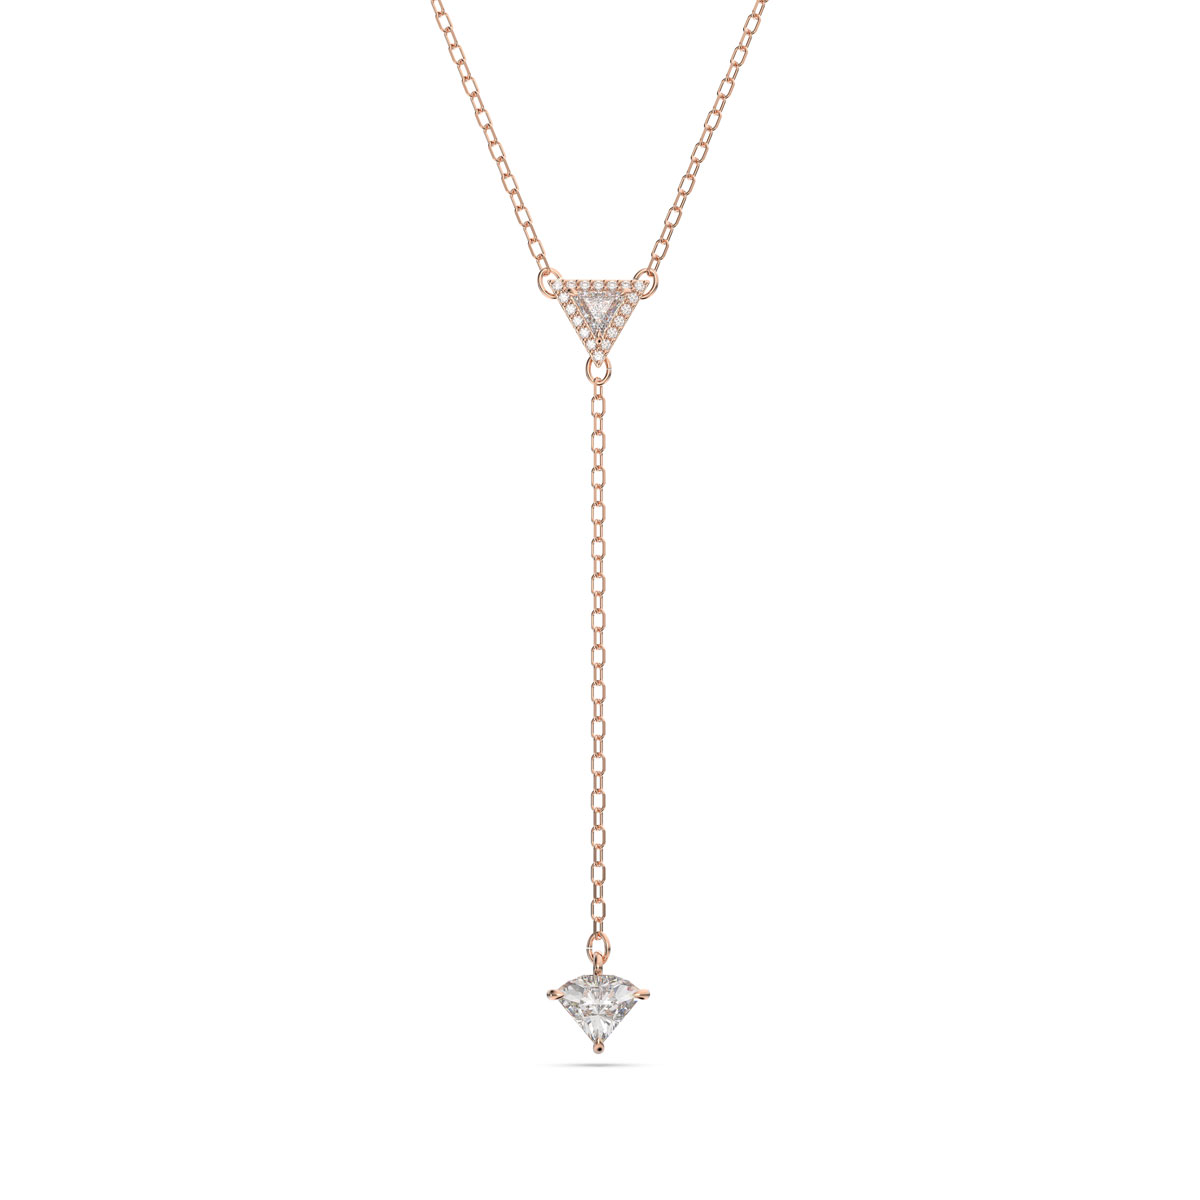 Swarovski Ortyx Y Necklace, Triangle Cut, White, Rose Gold Tone Plated